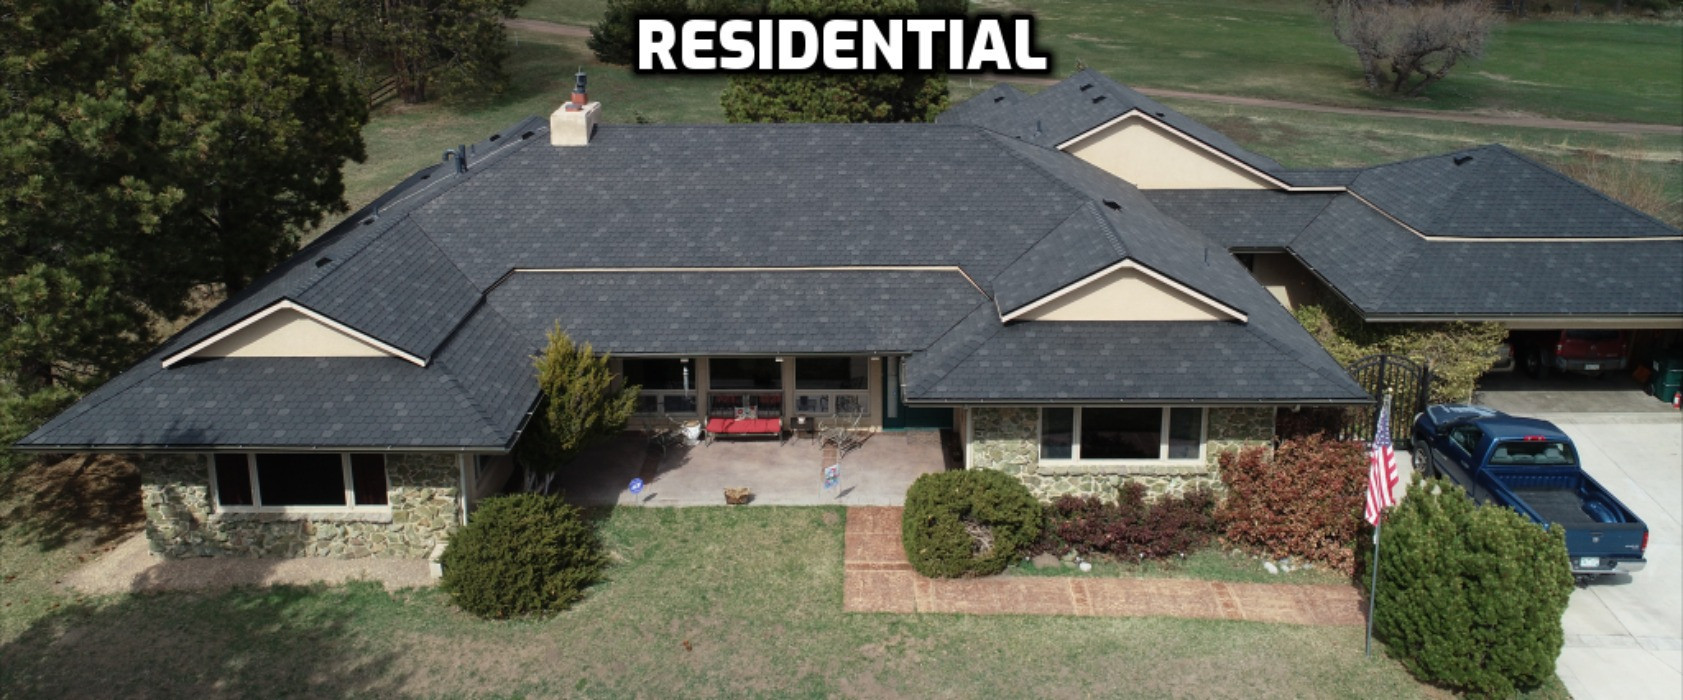 Residential F Wave Synthetic Shingle Roof